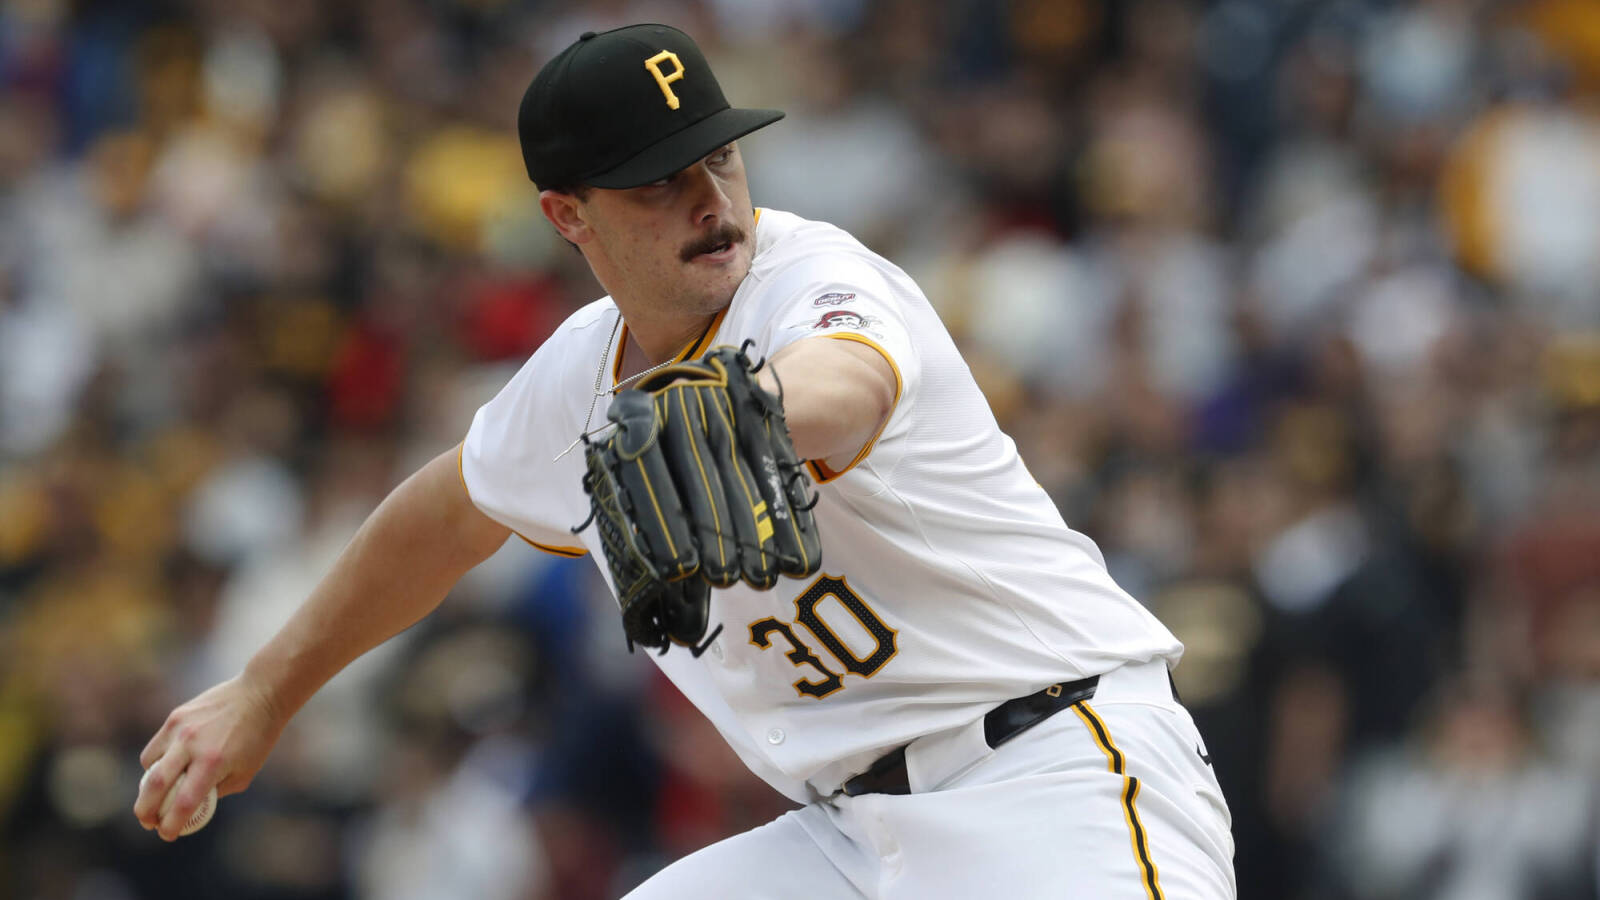 Watch: Paul Skenes wastes no time showing why Pirates drafted him No. 1 overall